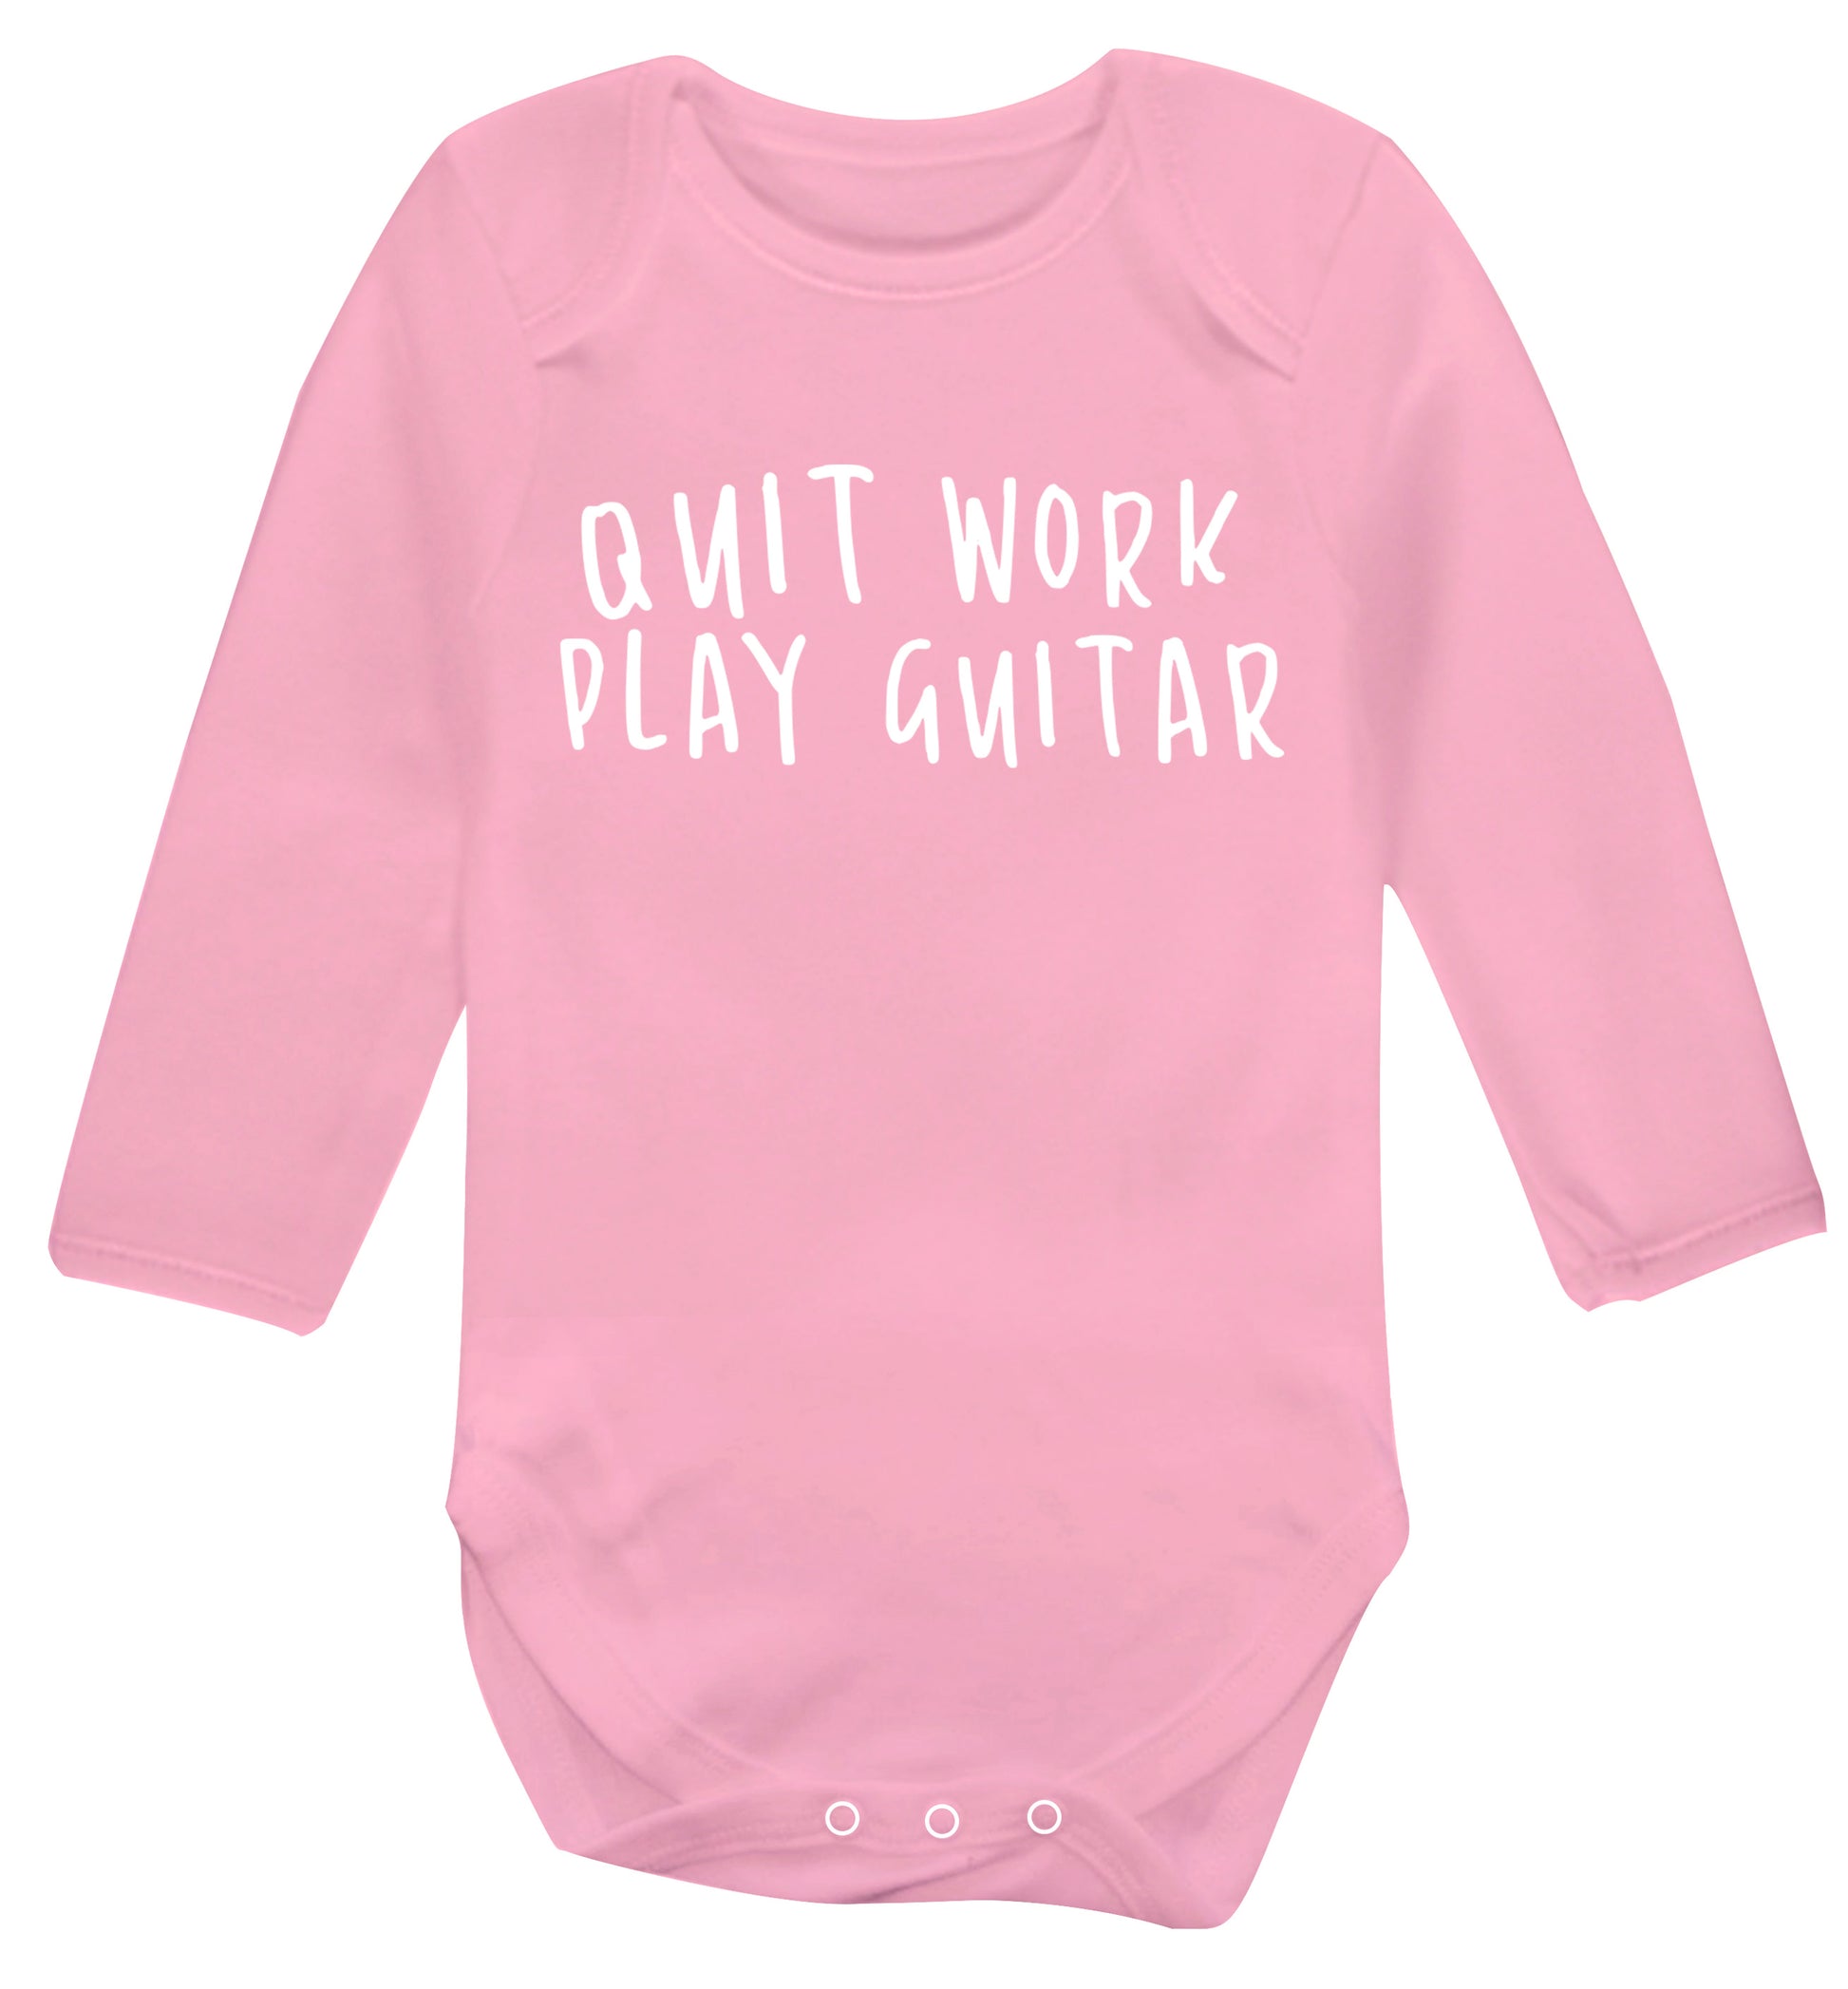 Quit work play guitar Baby Vest long sleeved pale pink 6-12 months